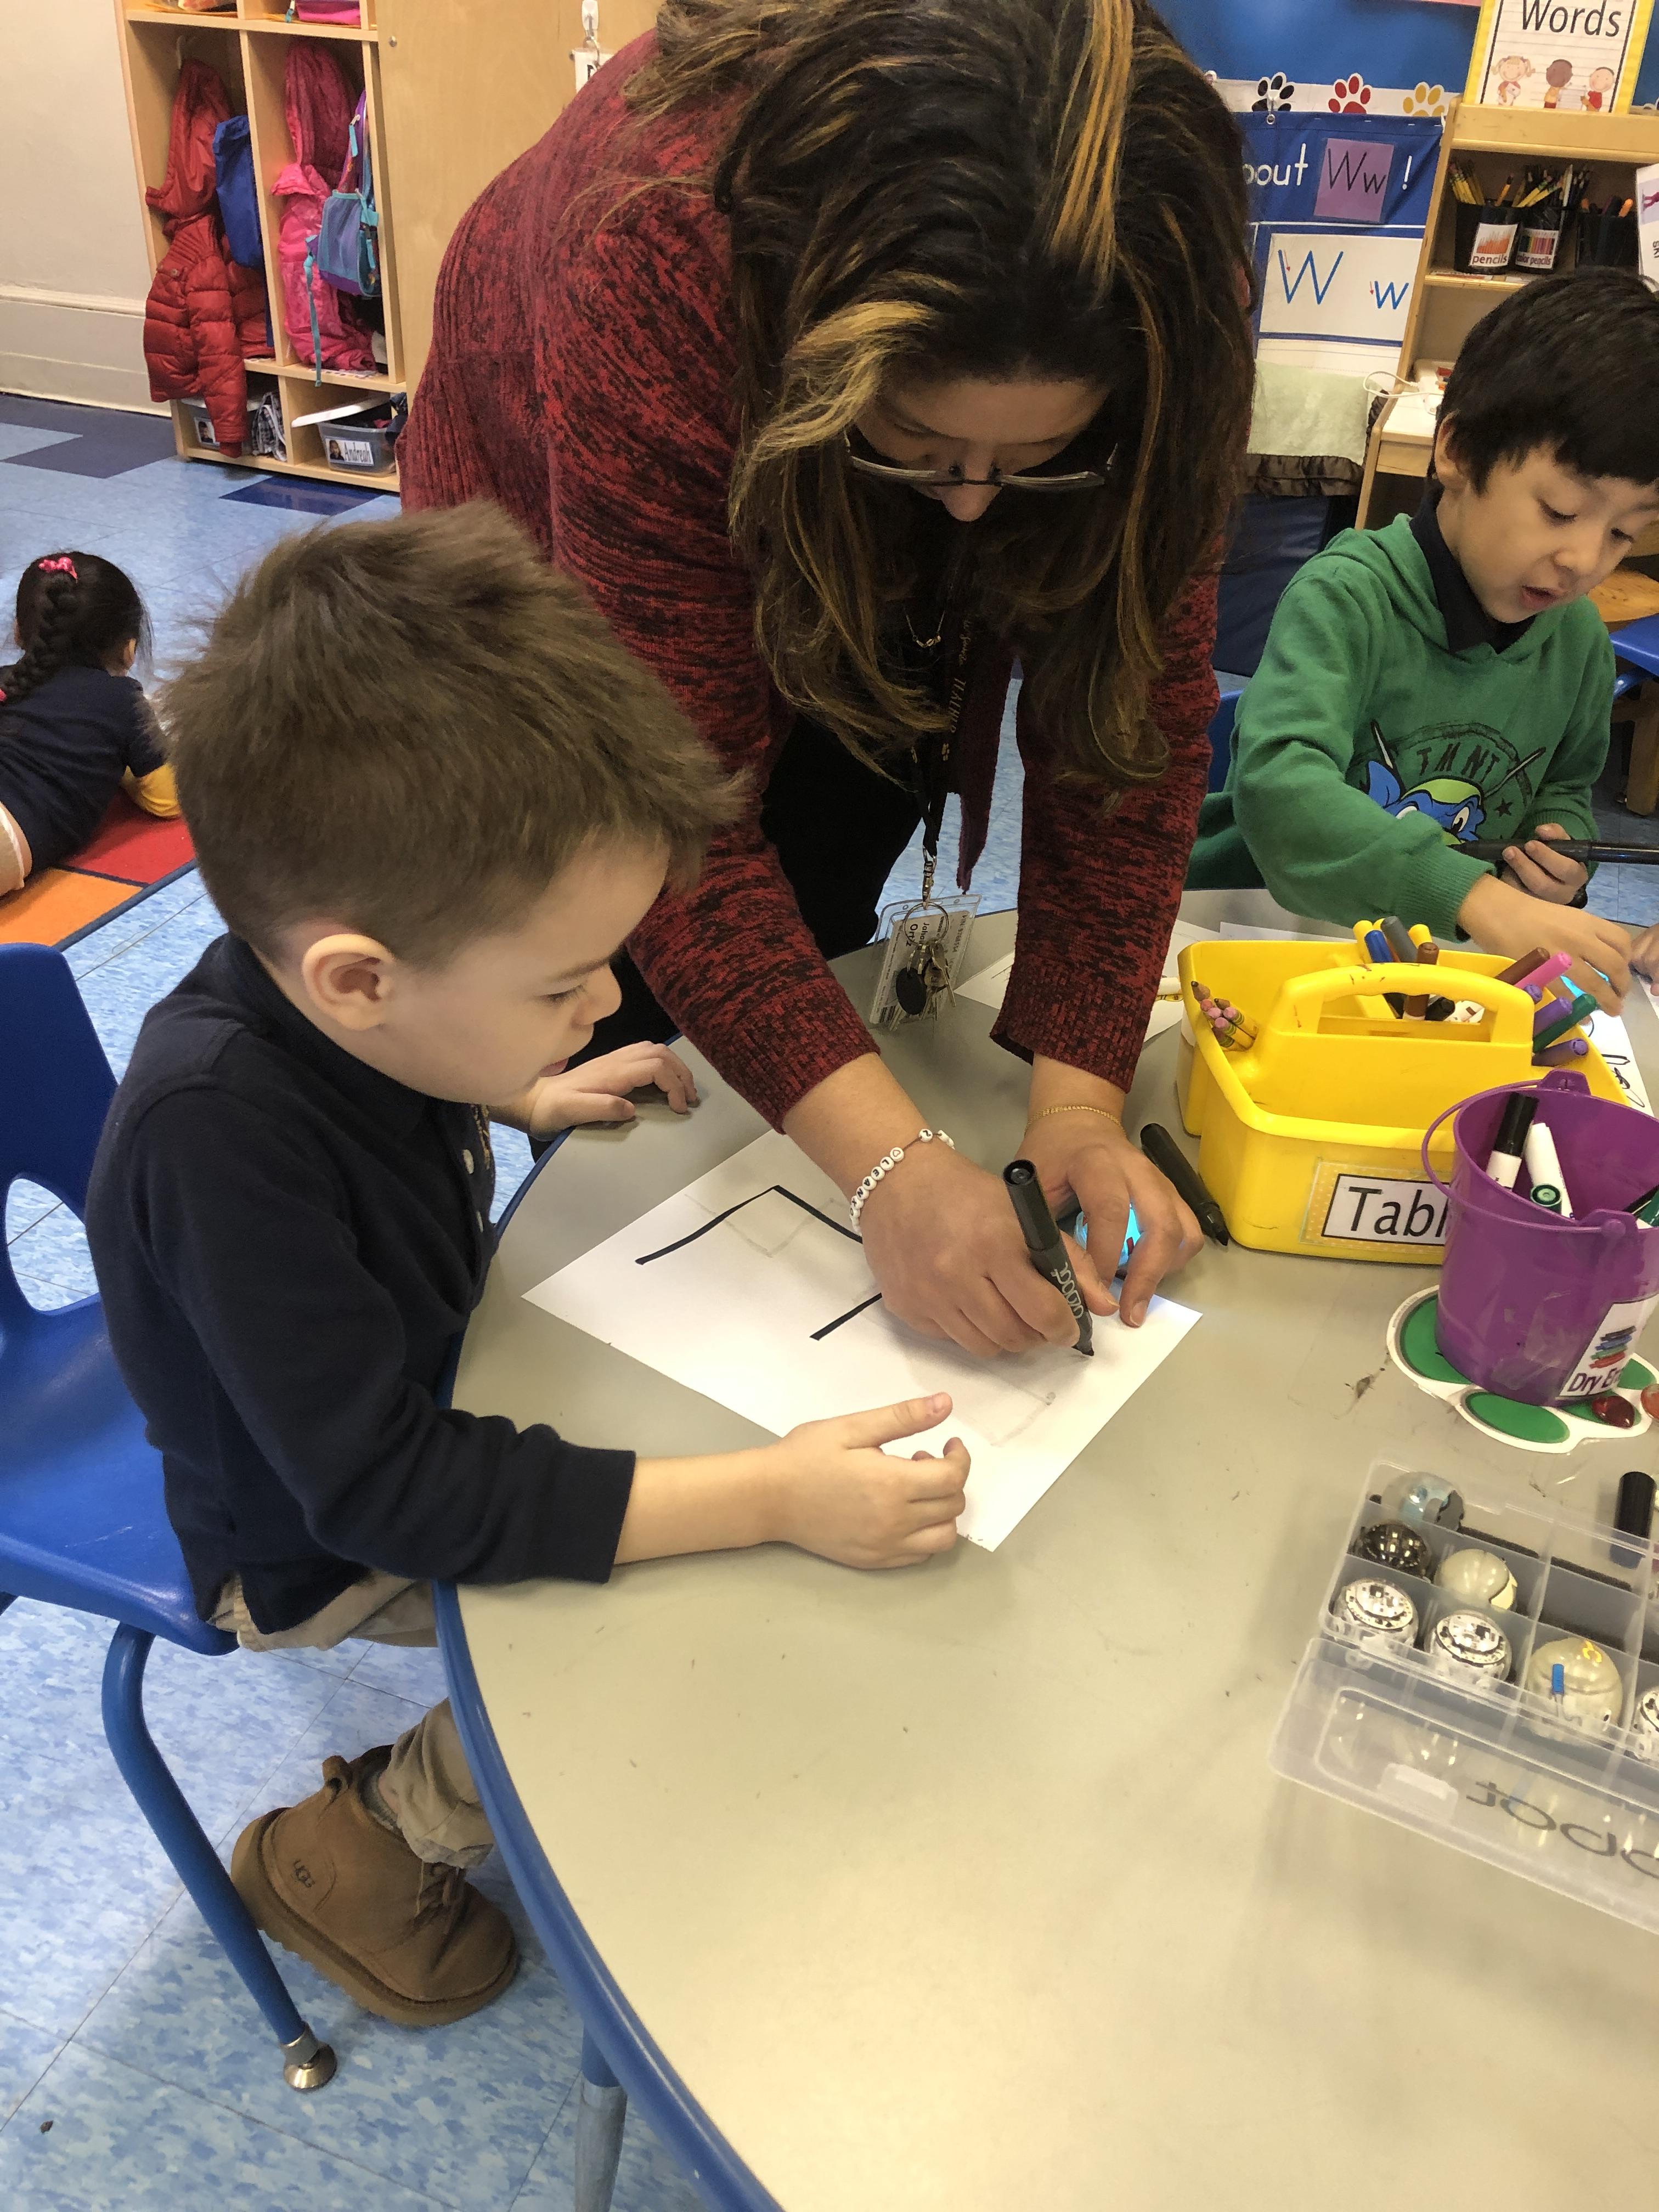 Ms. Ortiz at a table with several drawing coding lines